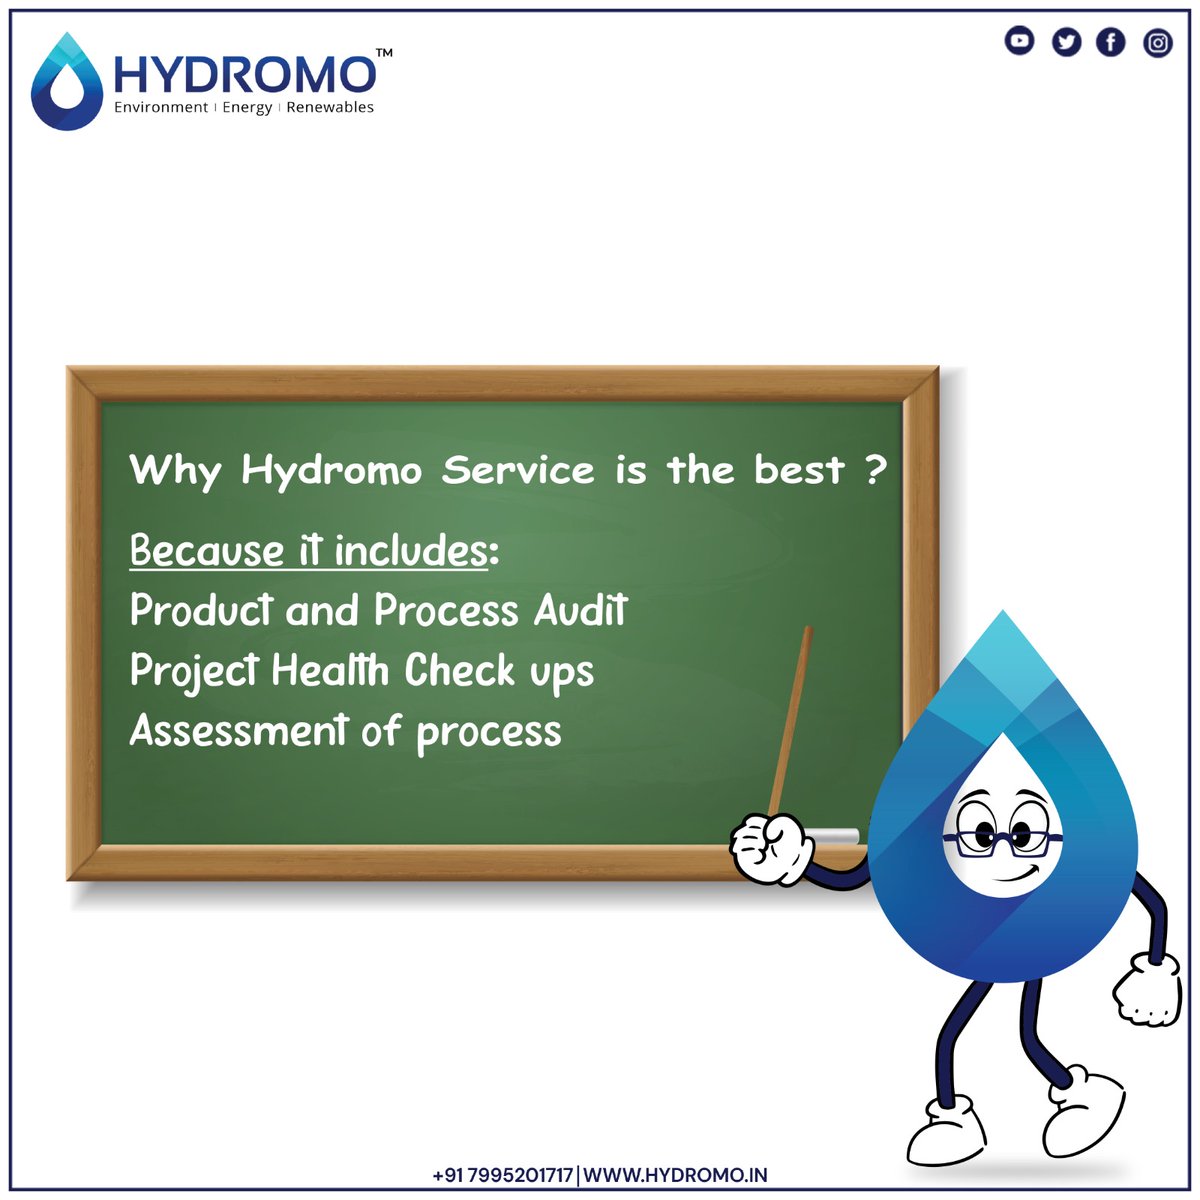 Choose Hydromo for an experience that exceeds expectations. Our product maintenance service is unmatched & our service team is readily available round the clock so you experience zero downtime. #watertreatment #wastewatermanagement #solarpower #zeroliquiddischarge #reverseosmosis